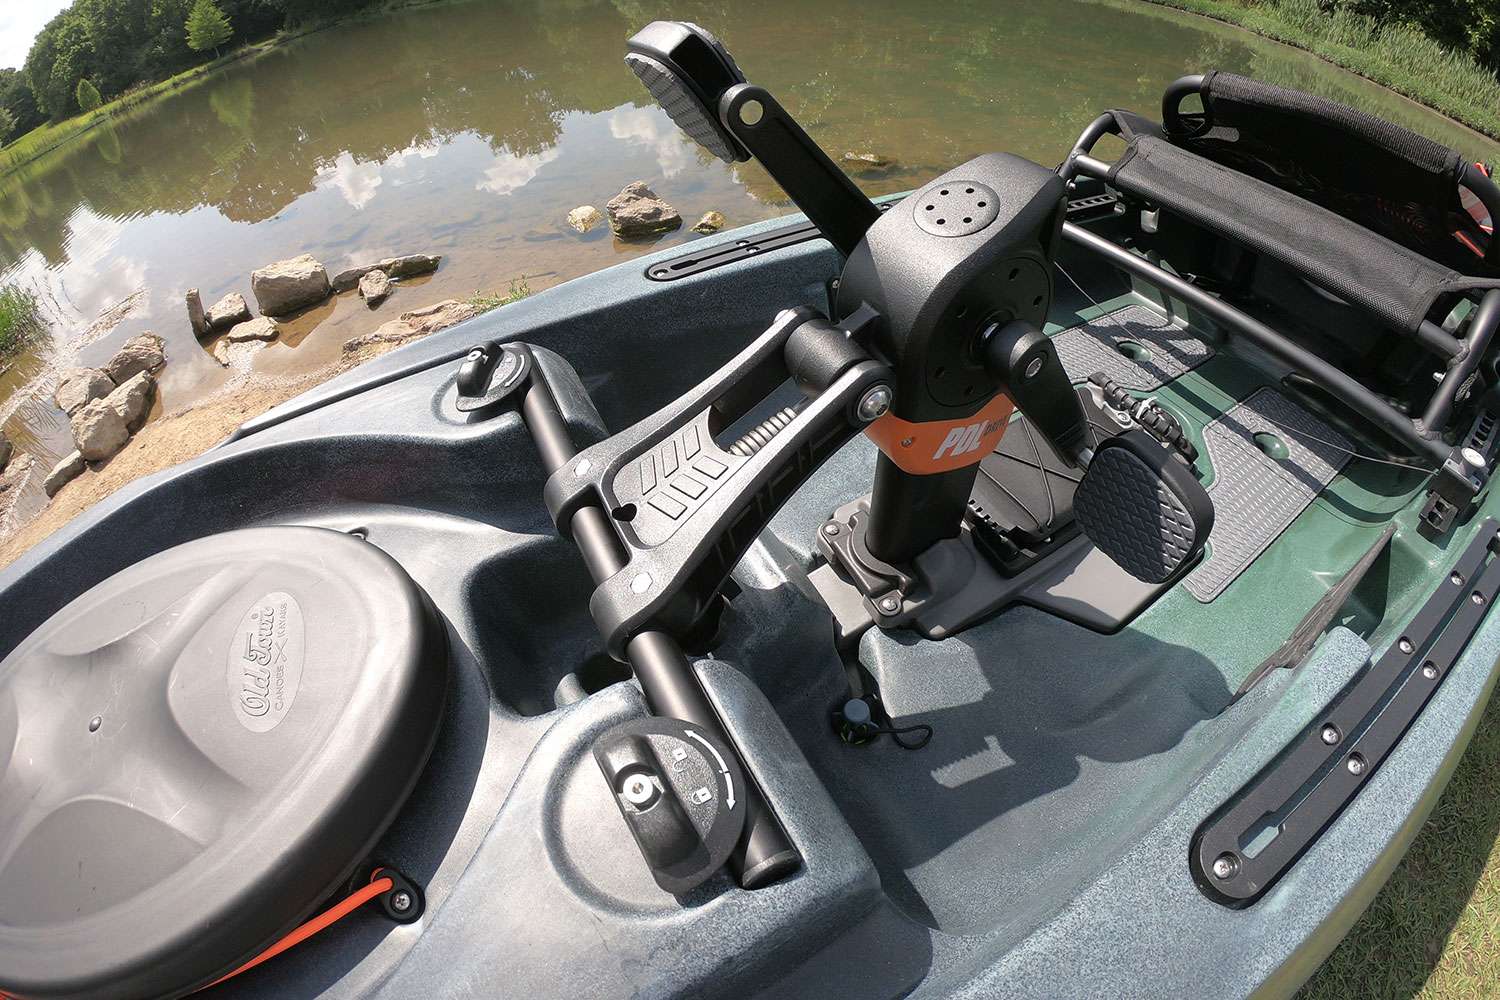 The PDL drive system conveniently slides into place when it's required for on-the-water maneuvering. The locks on either side of that shaft keep the entire unit in place, and by 